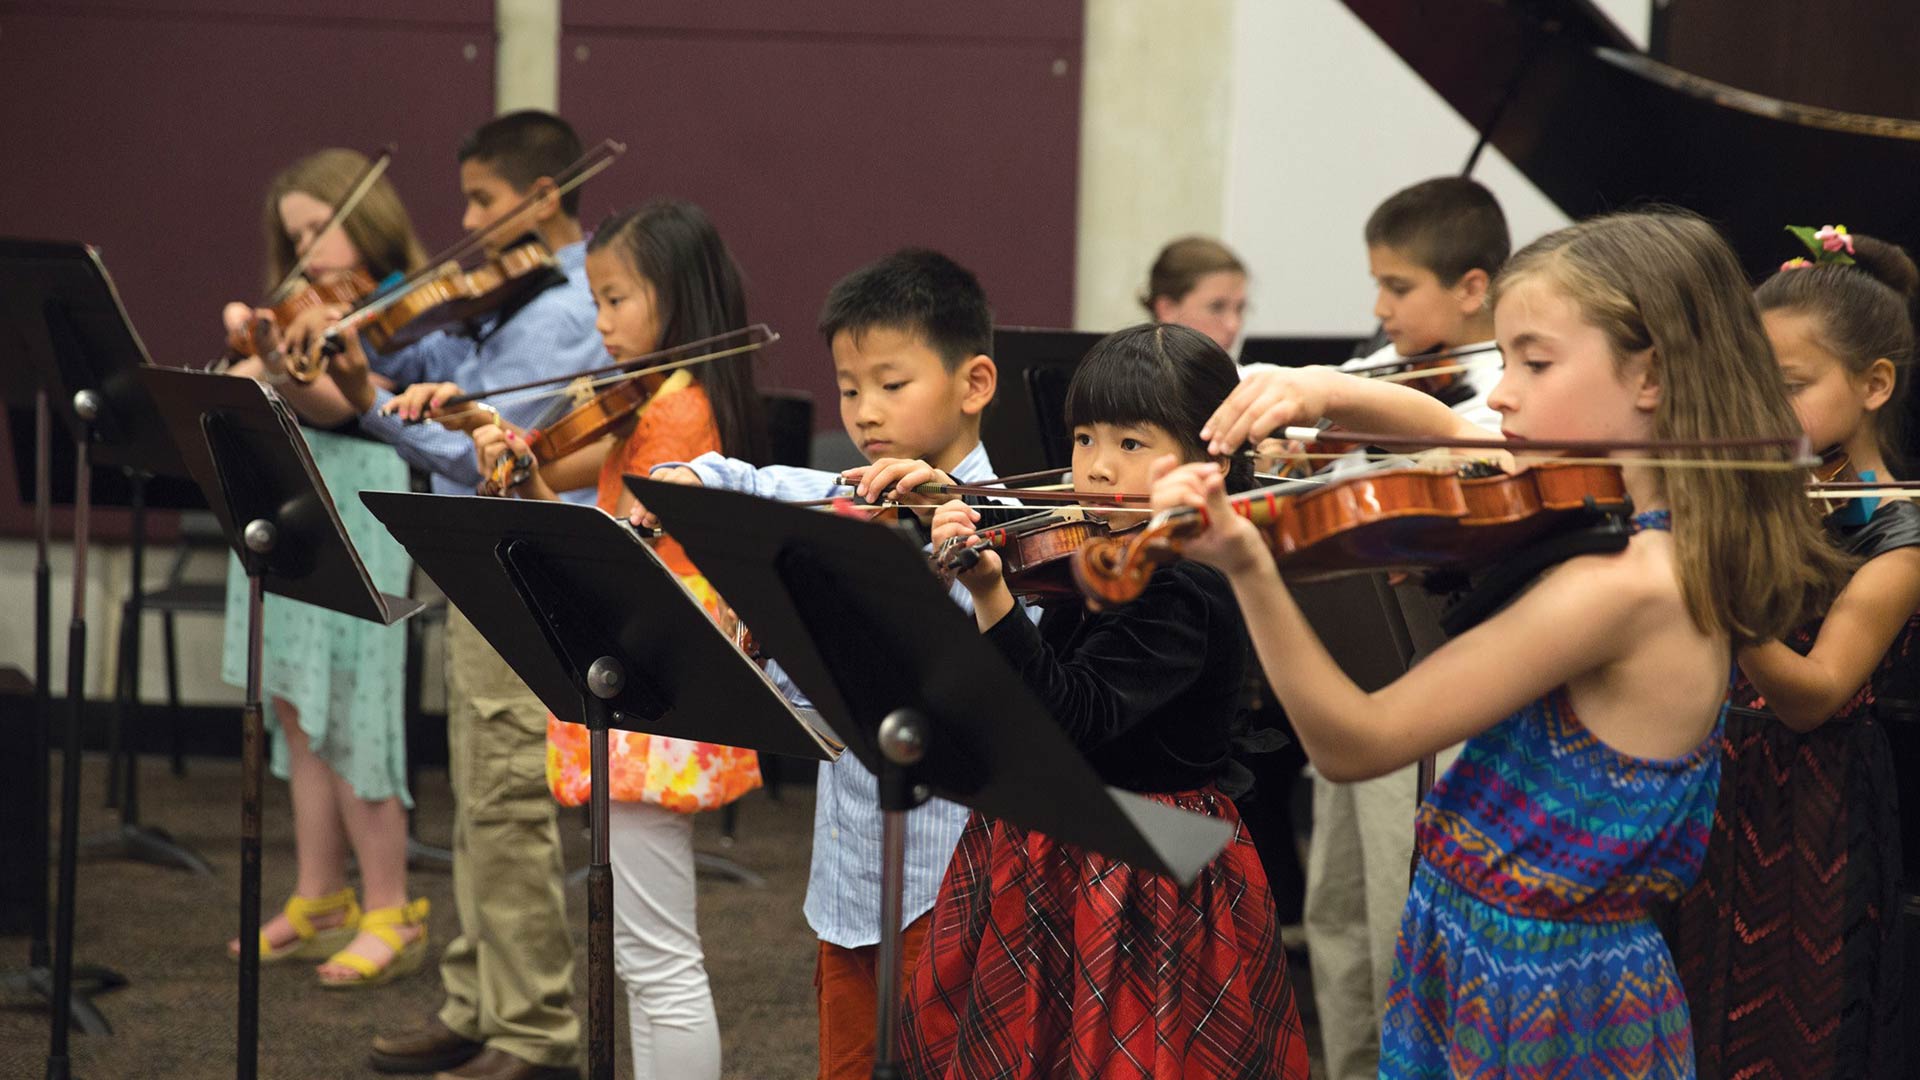 Group of students play violin together